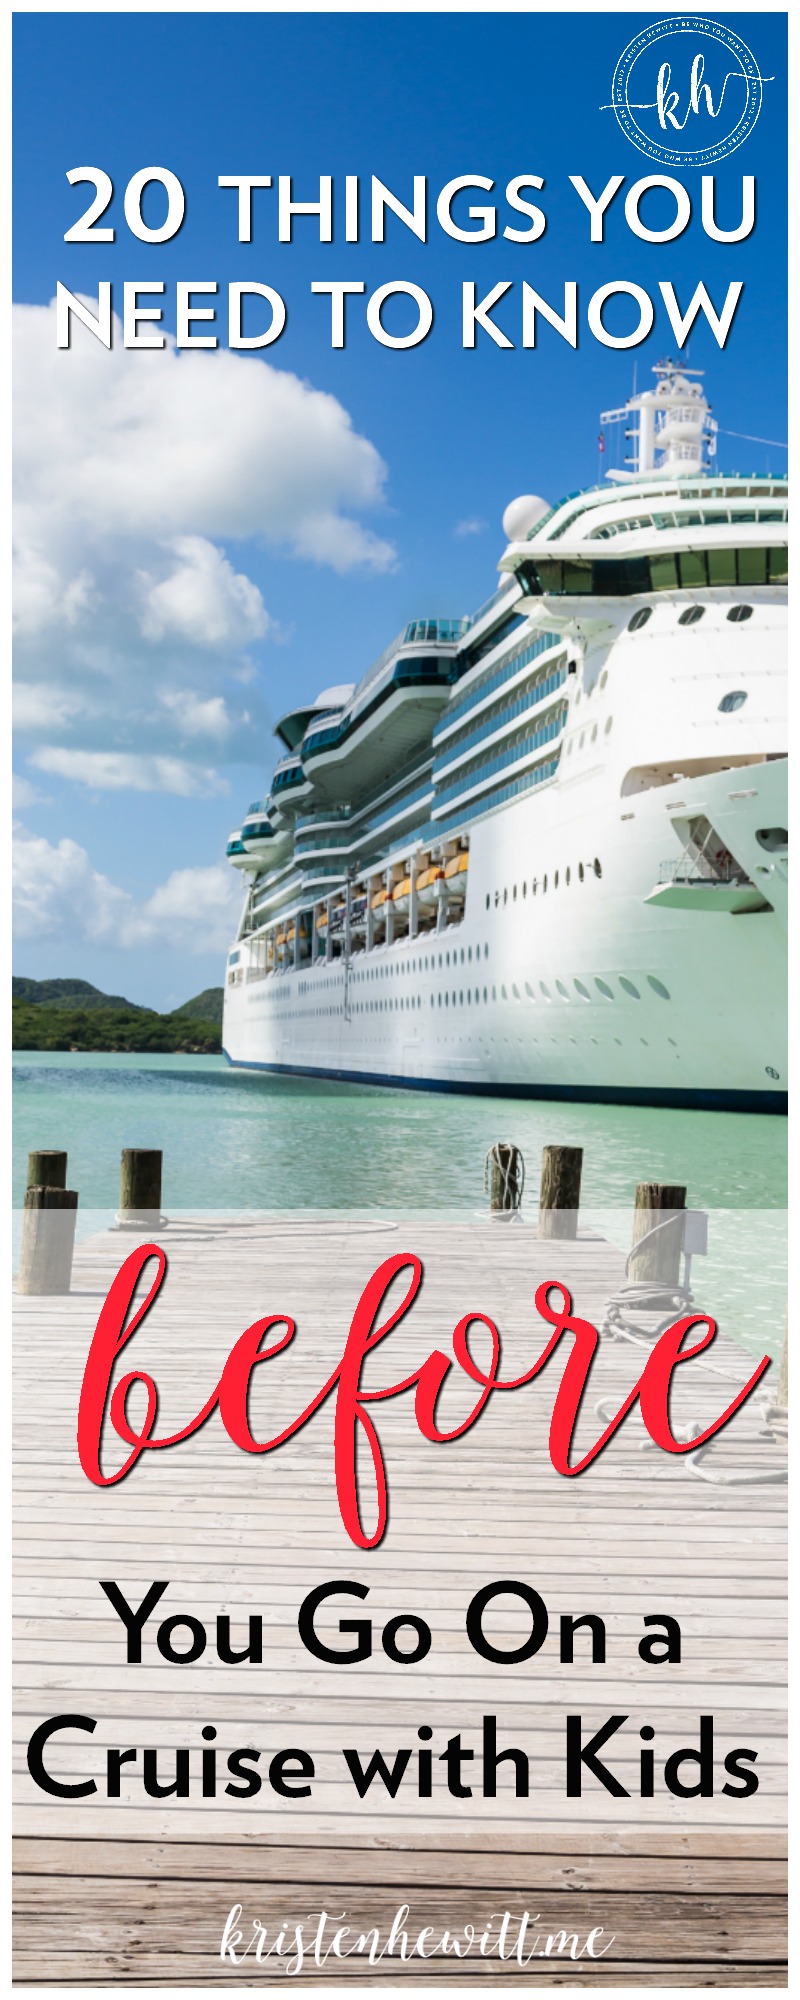 Heading on a cruise with kids? Read this FIRST! 20 things you NEED to know BEFORE you go on a cruise with kids! These travel hacks will save you!